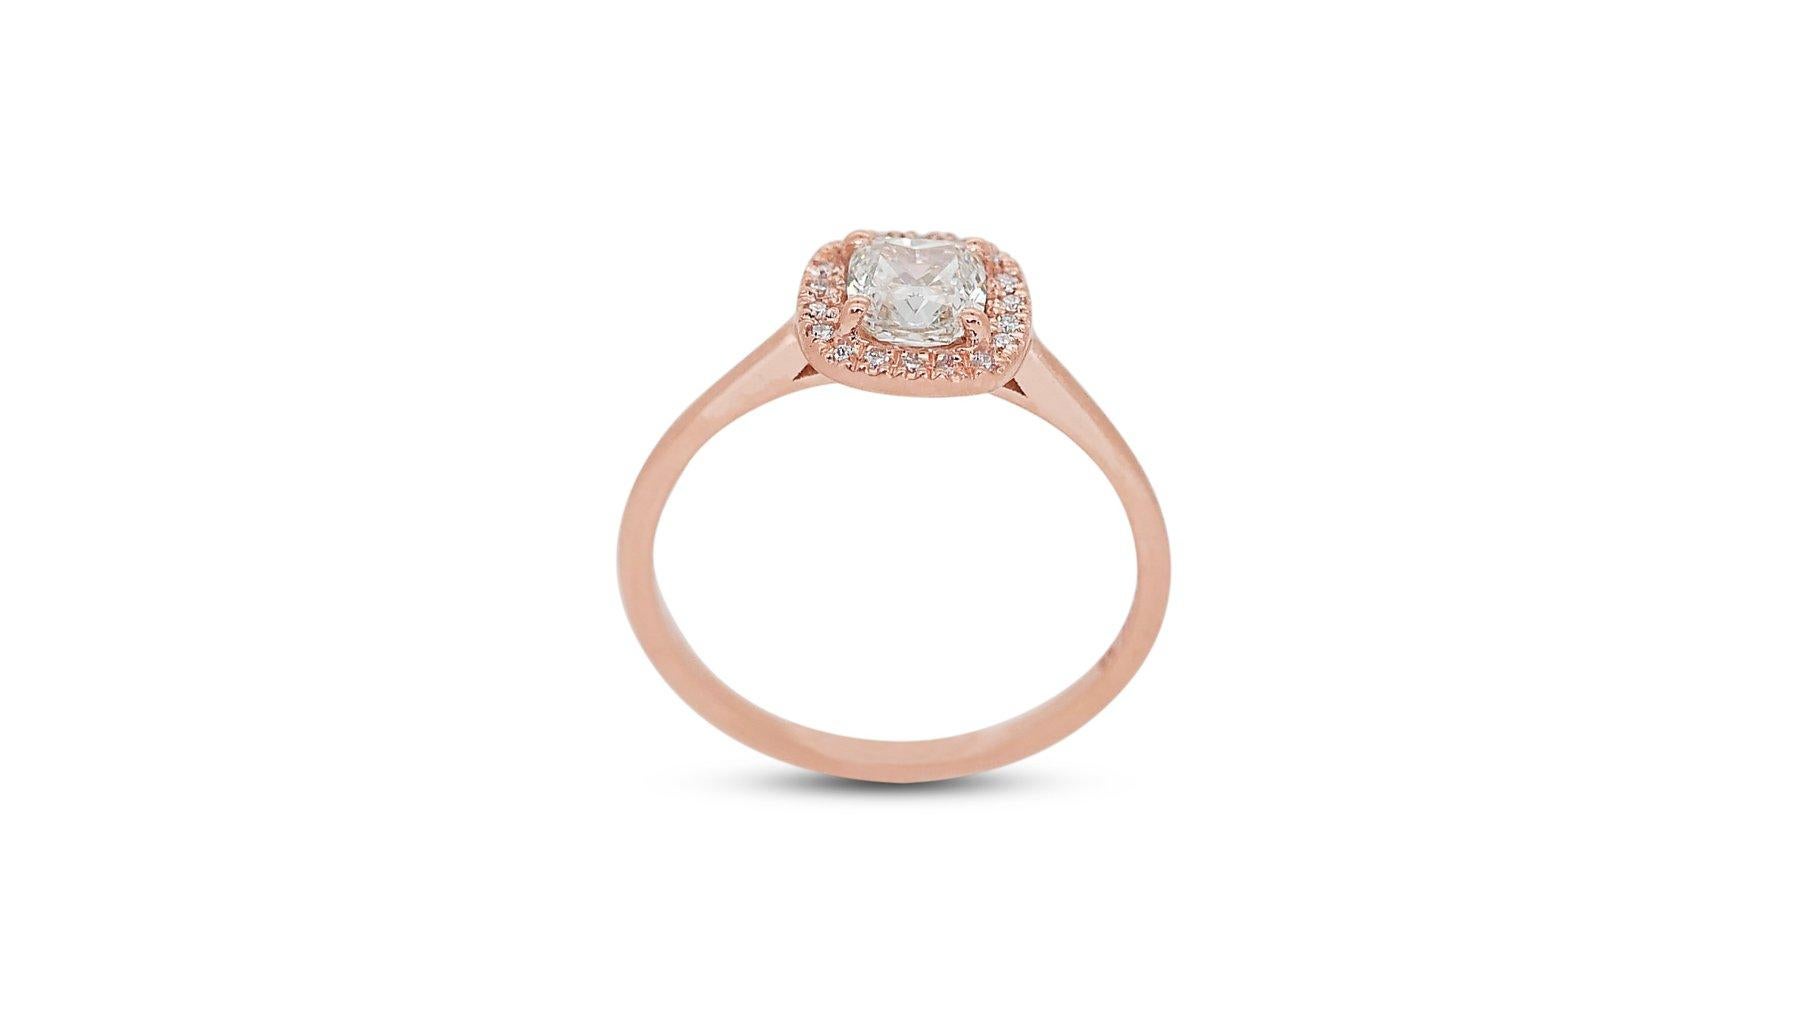 Gorgeous 1.60ct Diamonds Halo Ring in 18k Rose Gold - GIA Certified For Sale 1